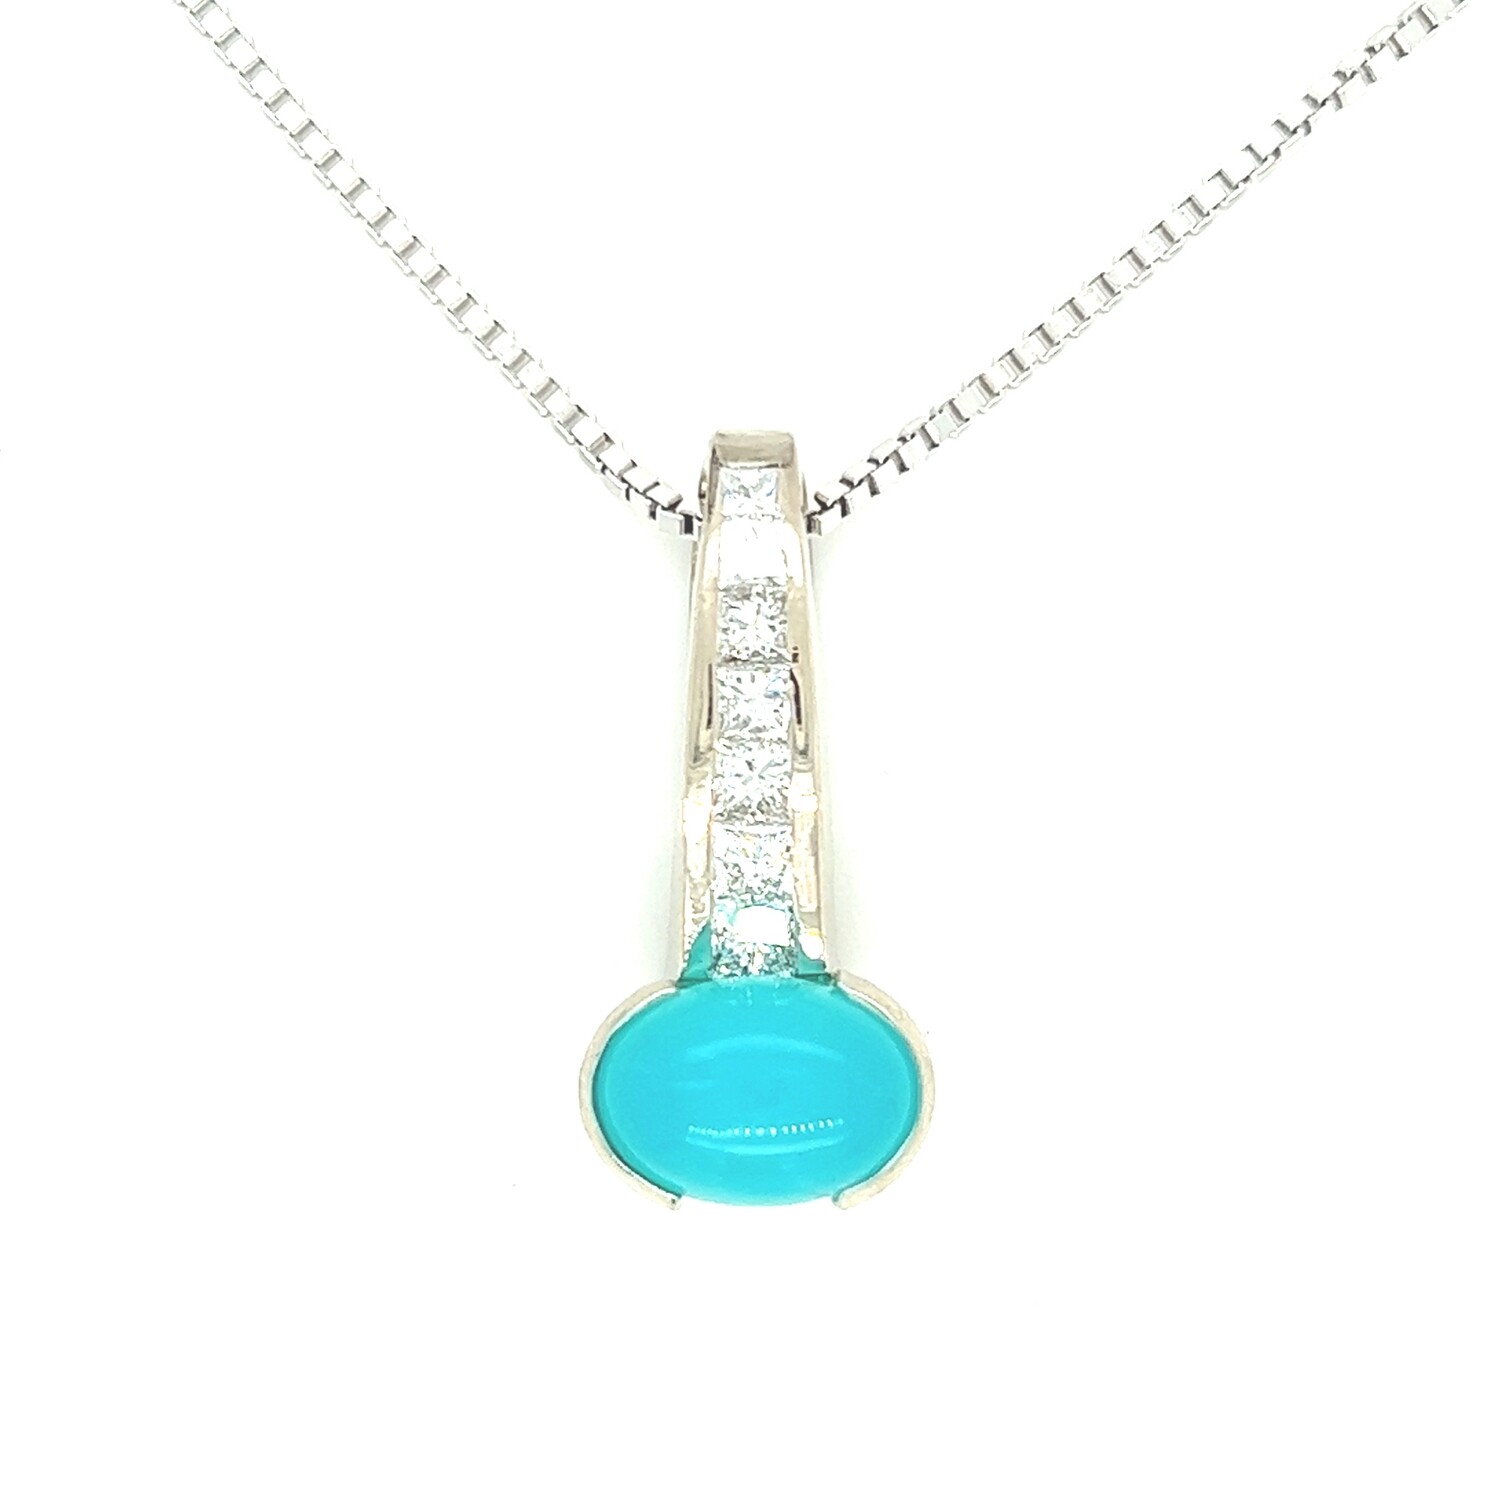 Cabochon Opal Diamond Necklace in 14k White Gold